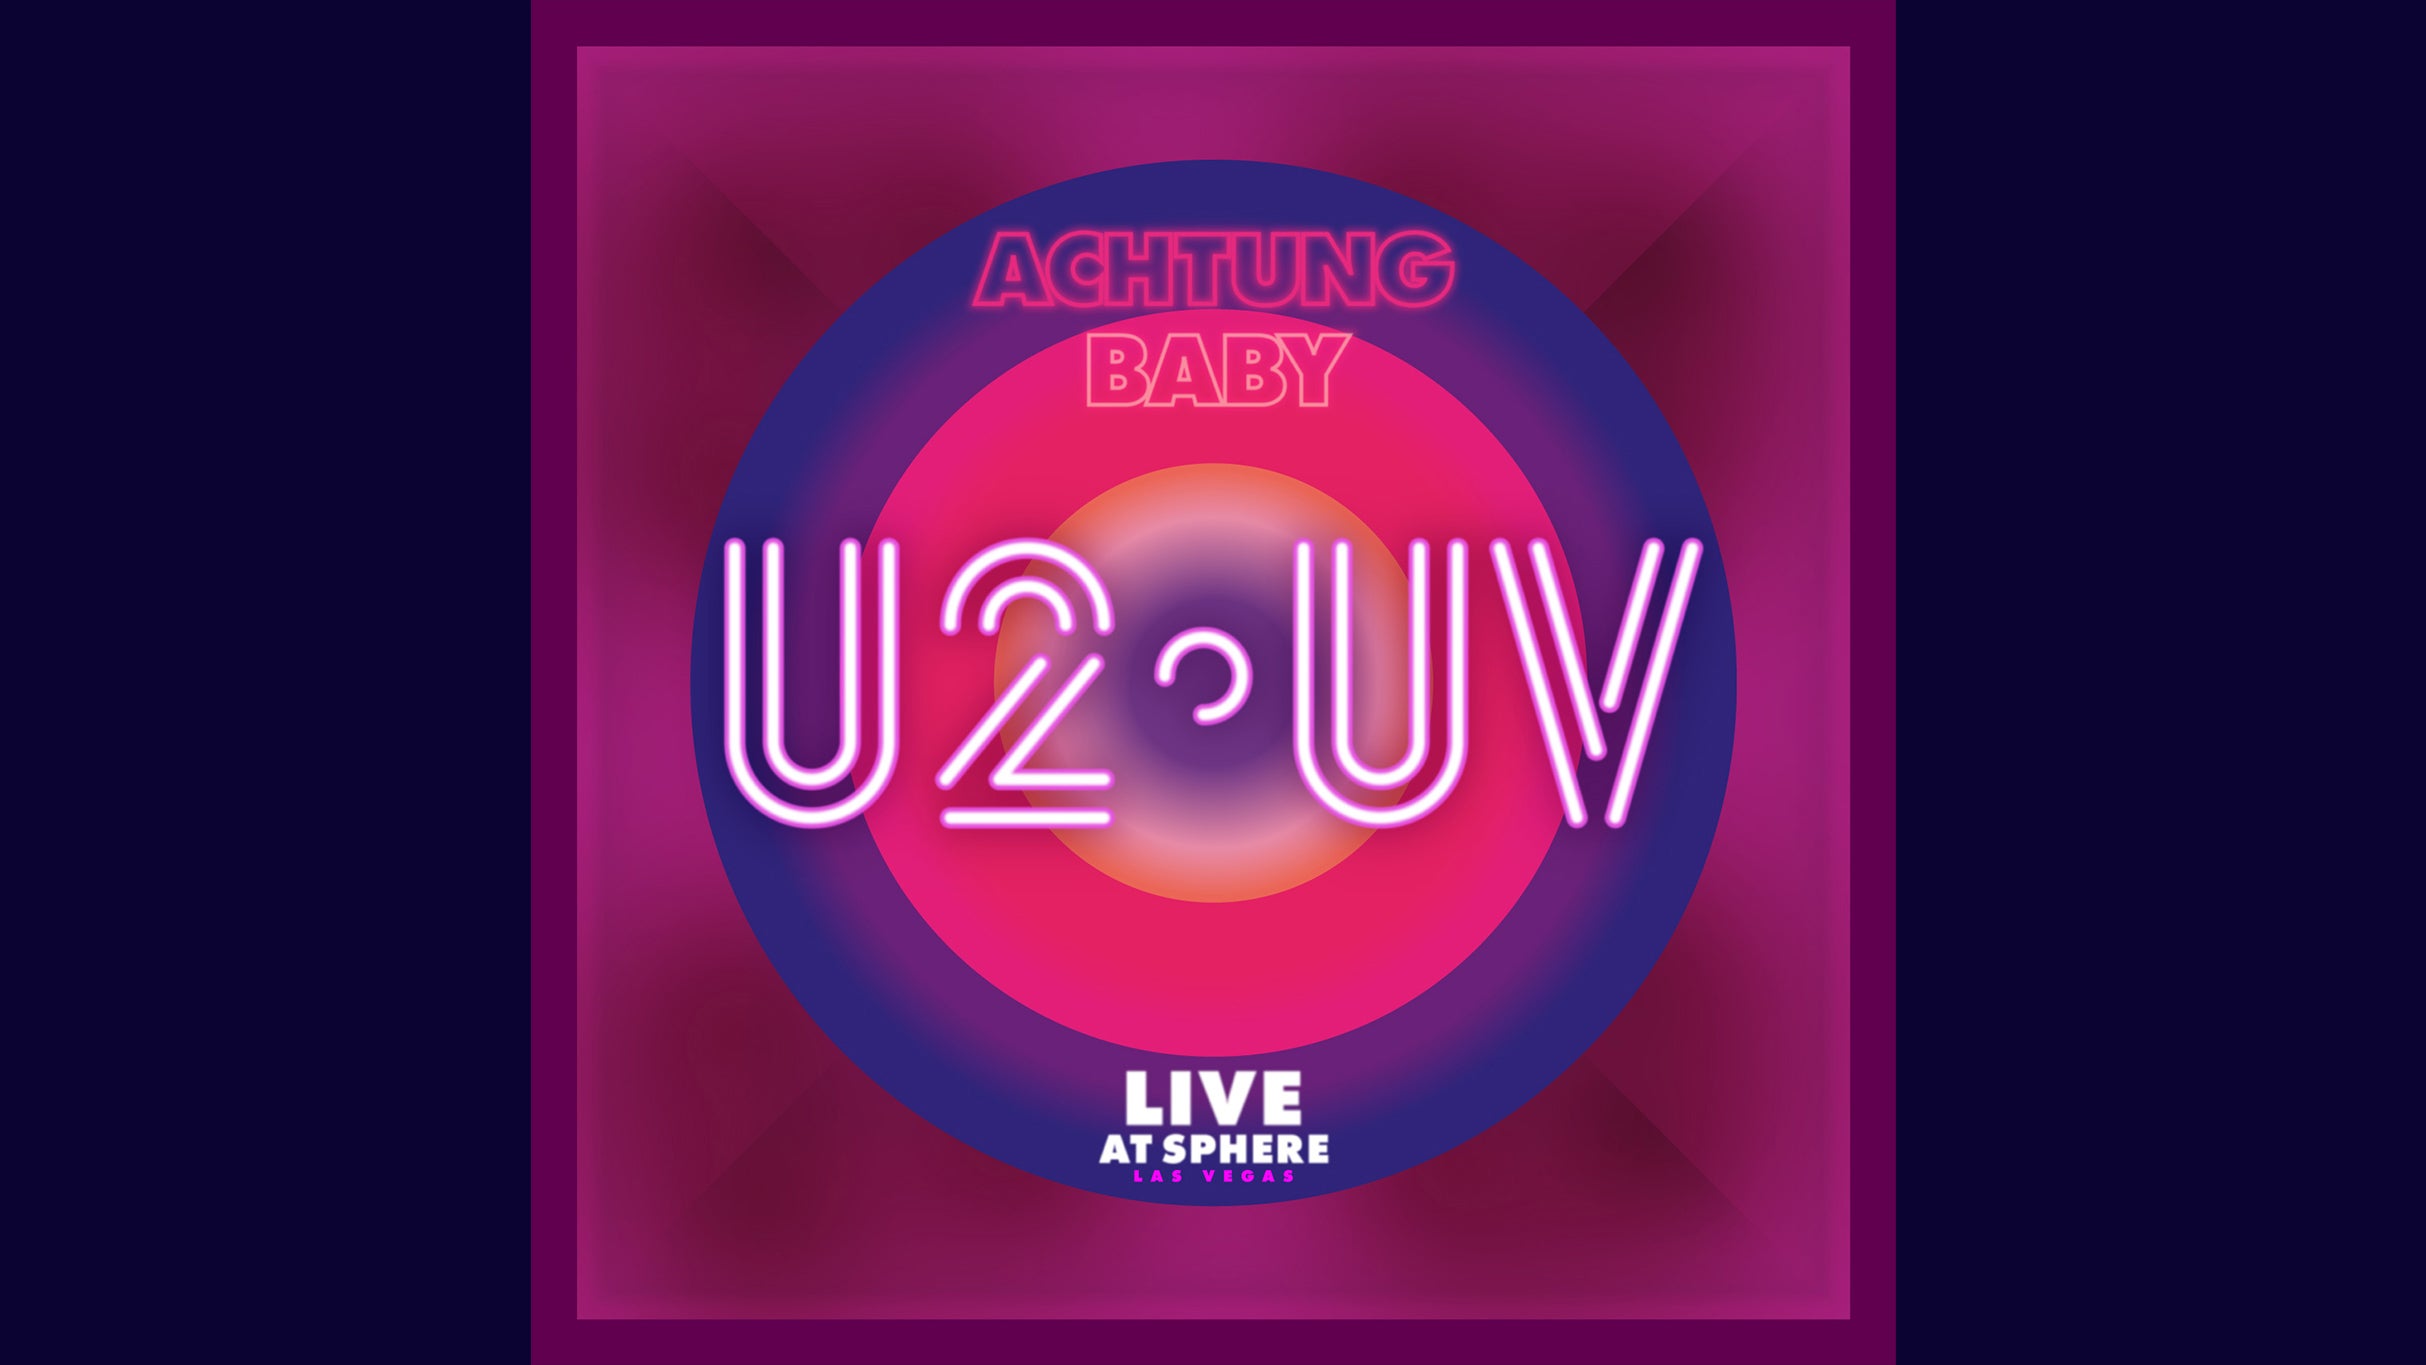 U2:UV Achtung Baby Live At Sphere - General Admission Floor in Las Vegas promo photo for Verified Fan presale offer code